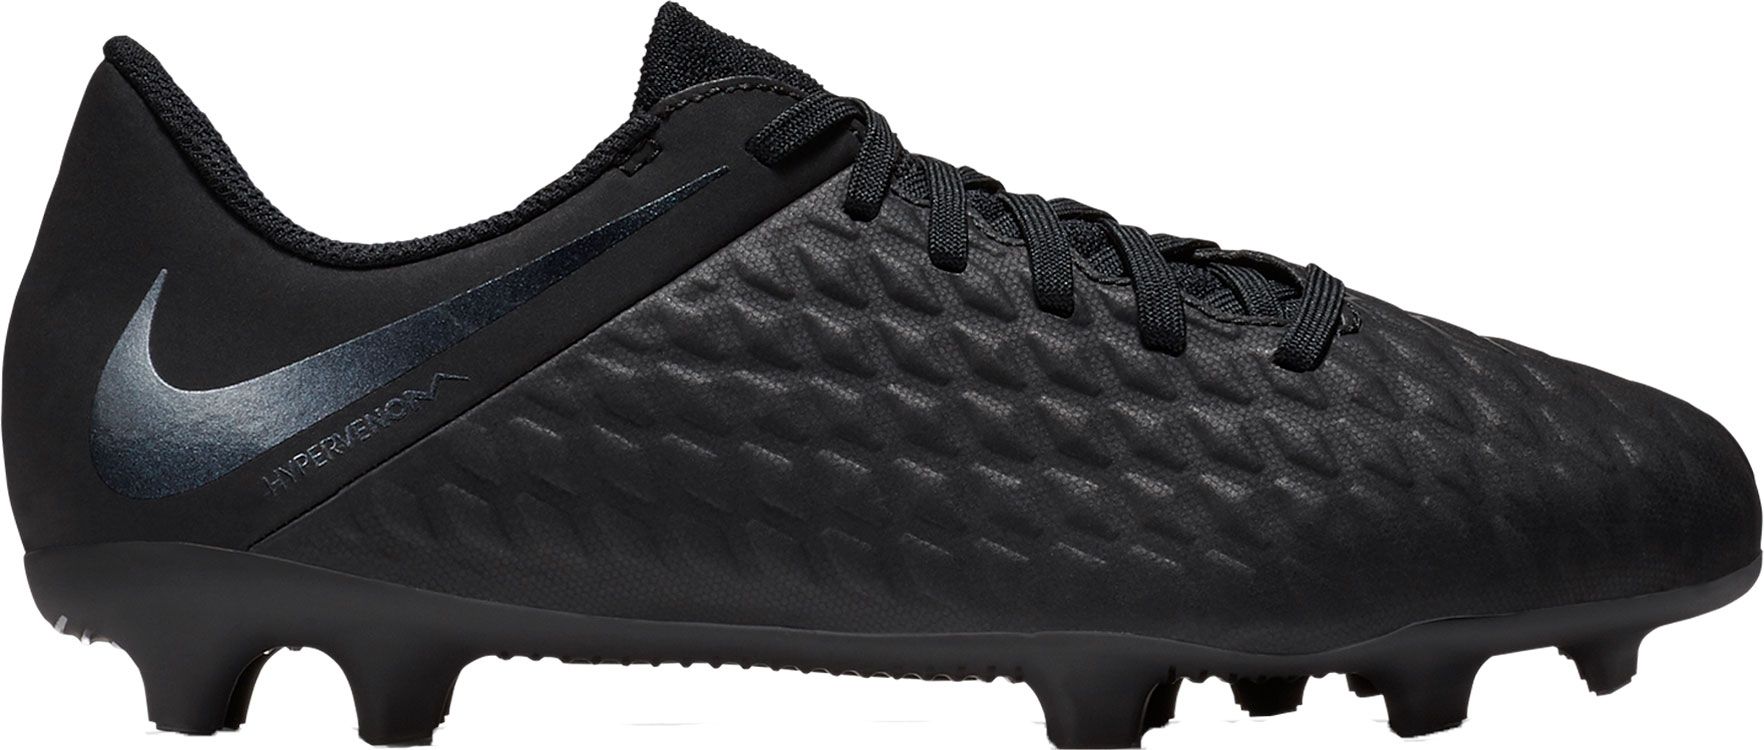 club fg soccer cleats review 